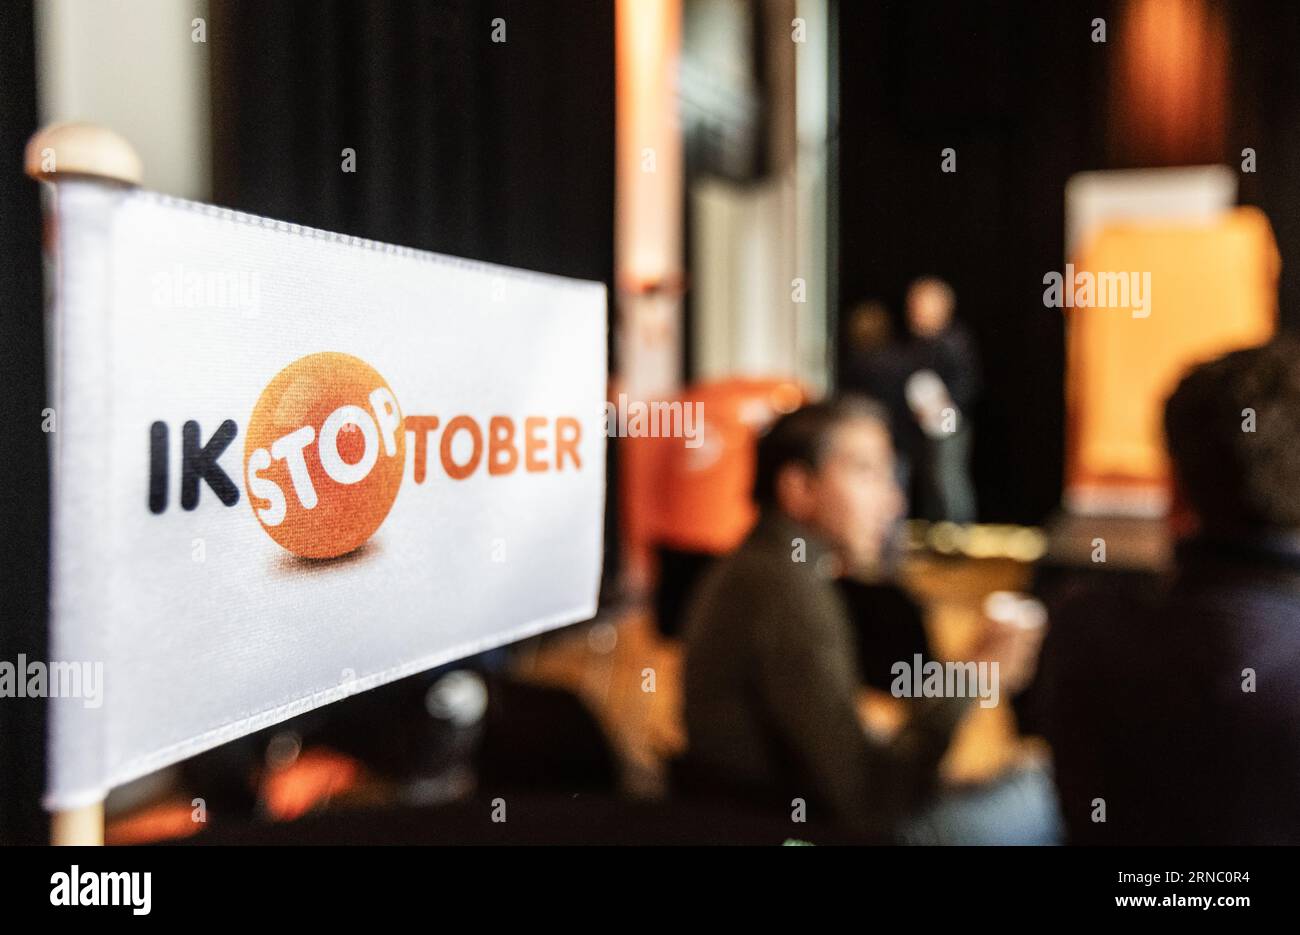 AMSTERDAM - Flag 'Ik Stoptober' during the kick-off of the ten year anniversary edition of Stoptober. Stoptober is an annual campaign to encourage smokers to stop smoking for 28 days in October. ANP EVA PLEVIER netherlands out - belgium out Stock Photo